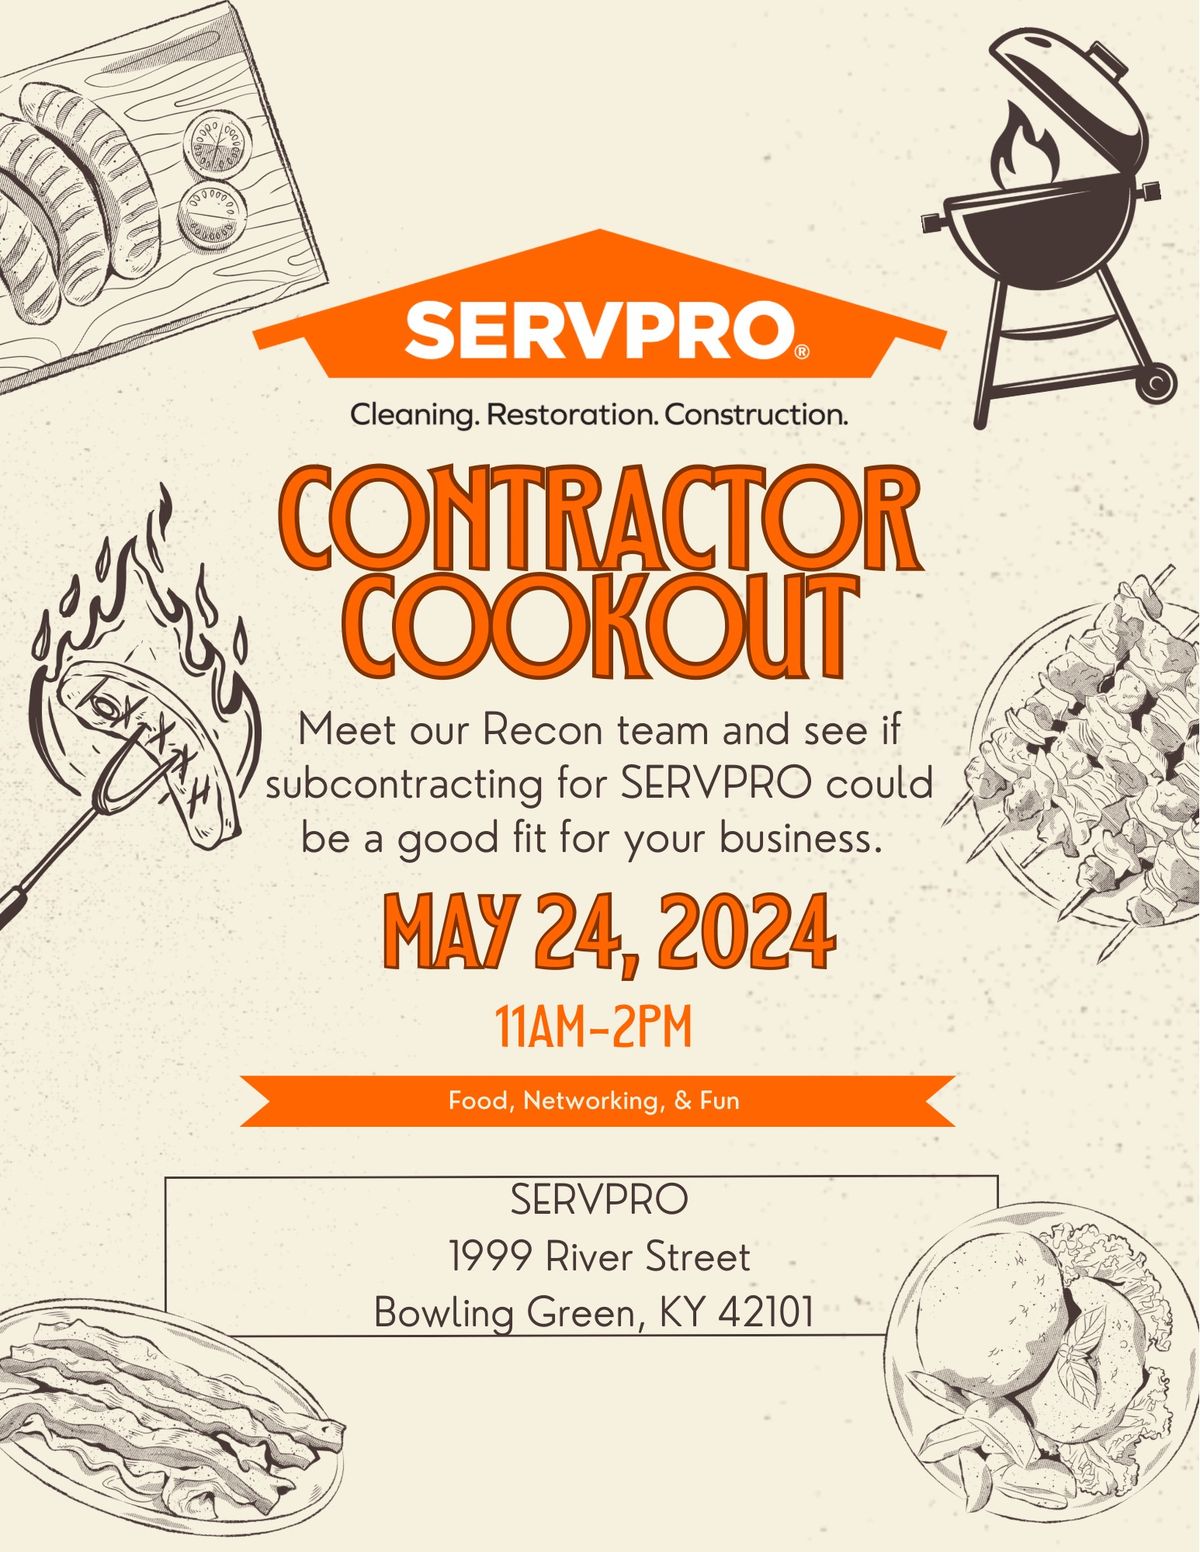 SERVPRO Contractor Cookout